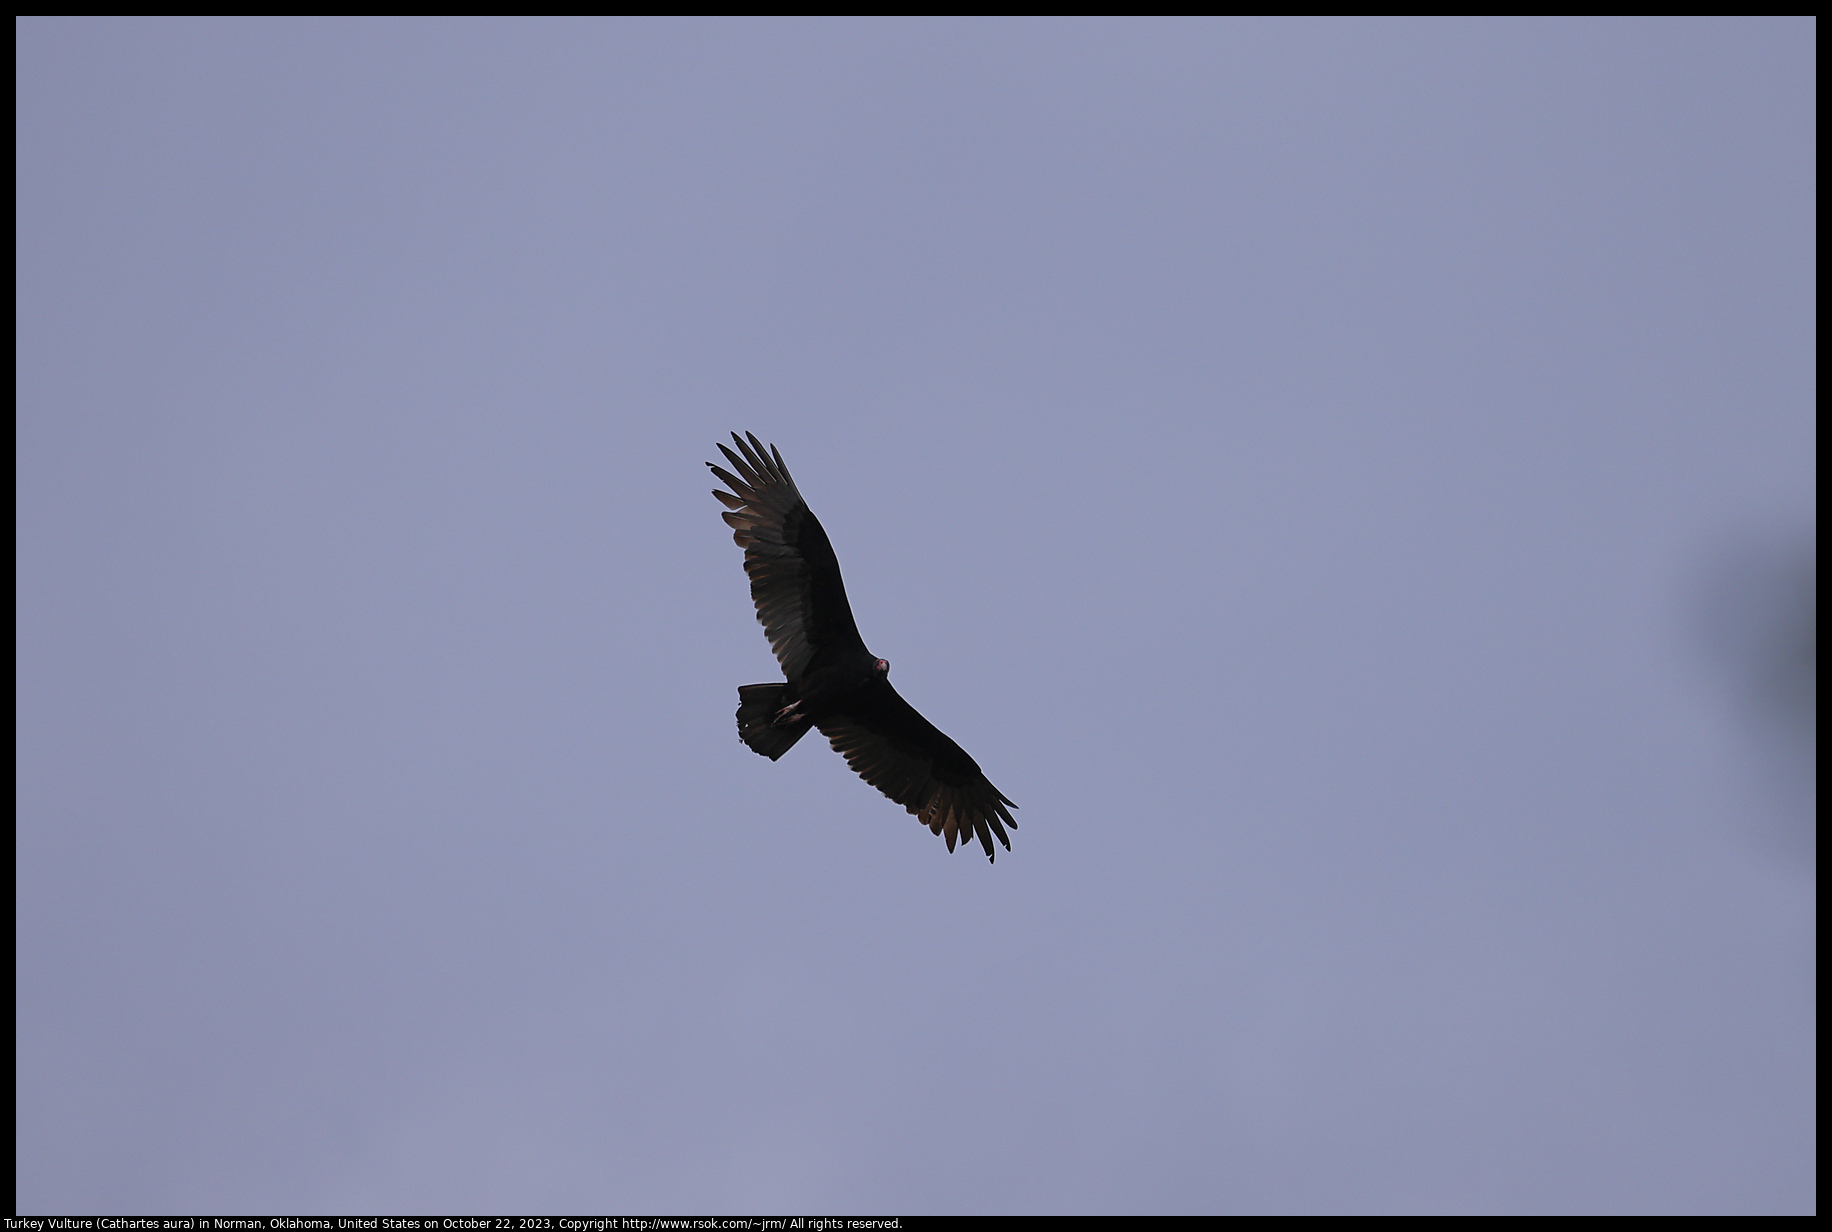 Turkey Vulture (Cathartes aura) in Norman, Oklahoma, United States on October 20, 2023